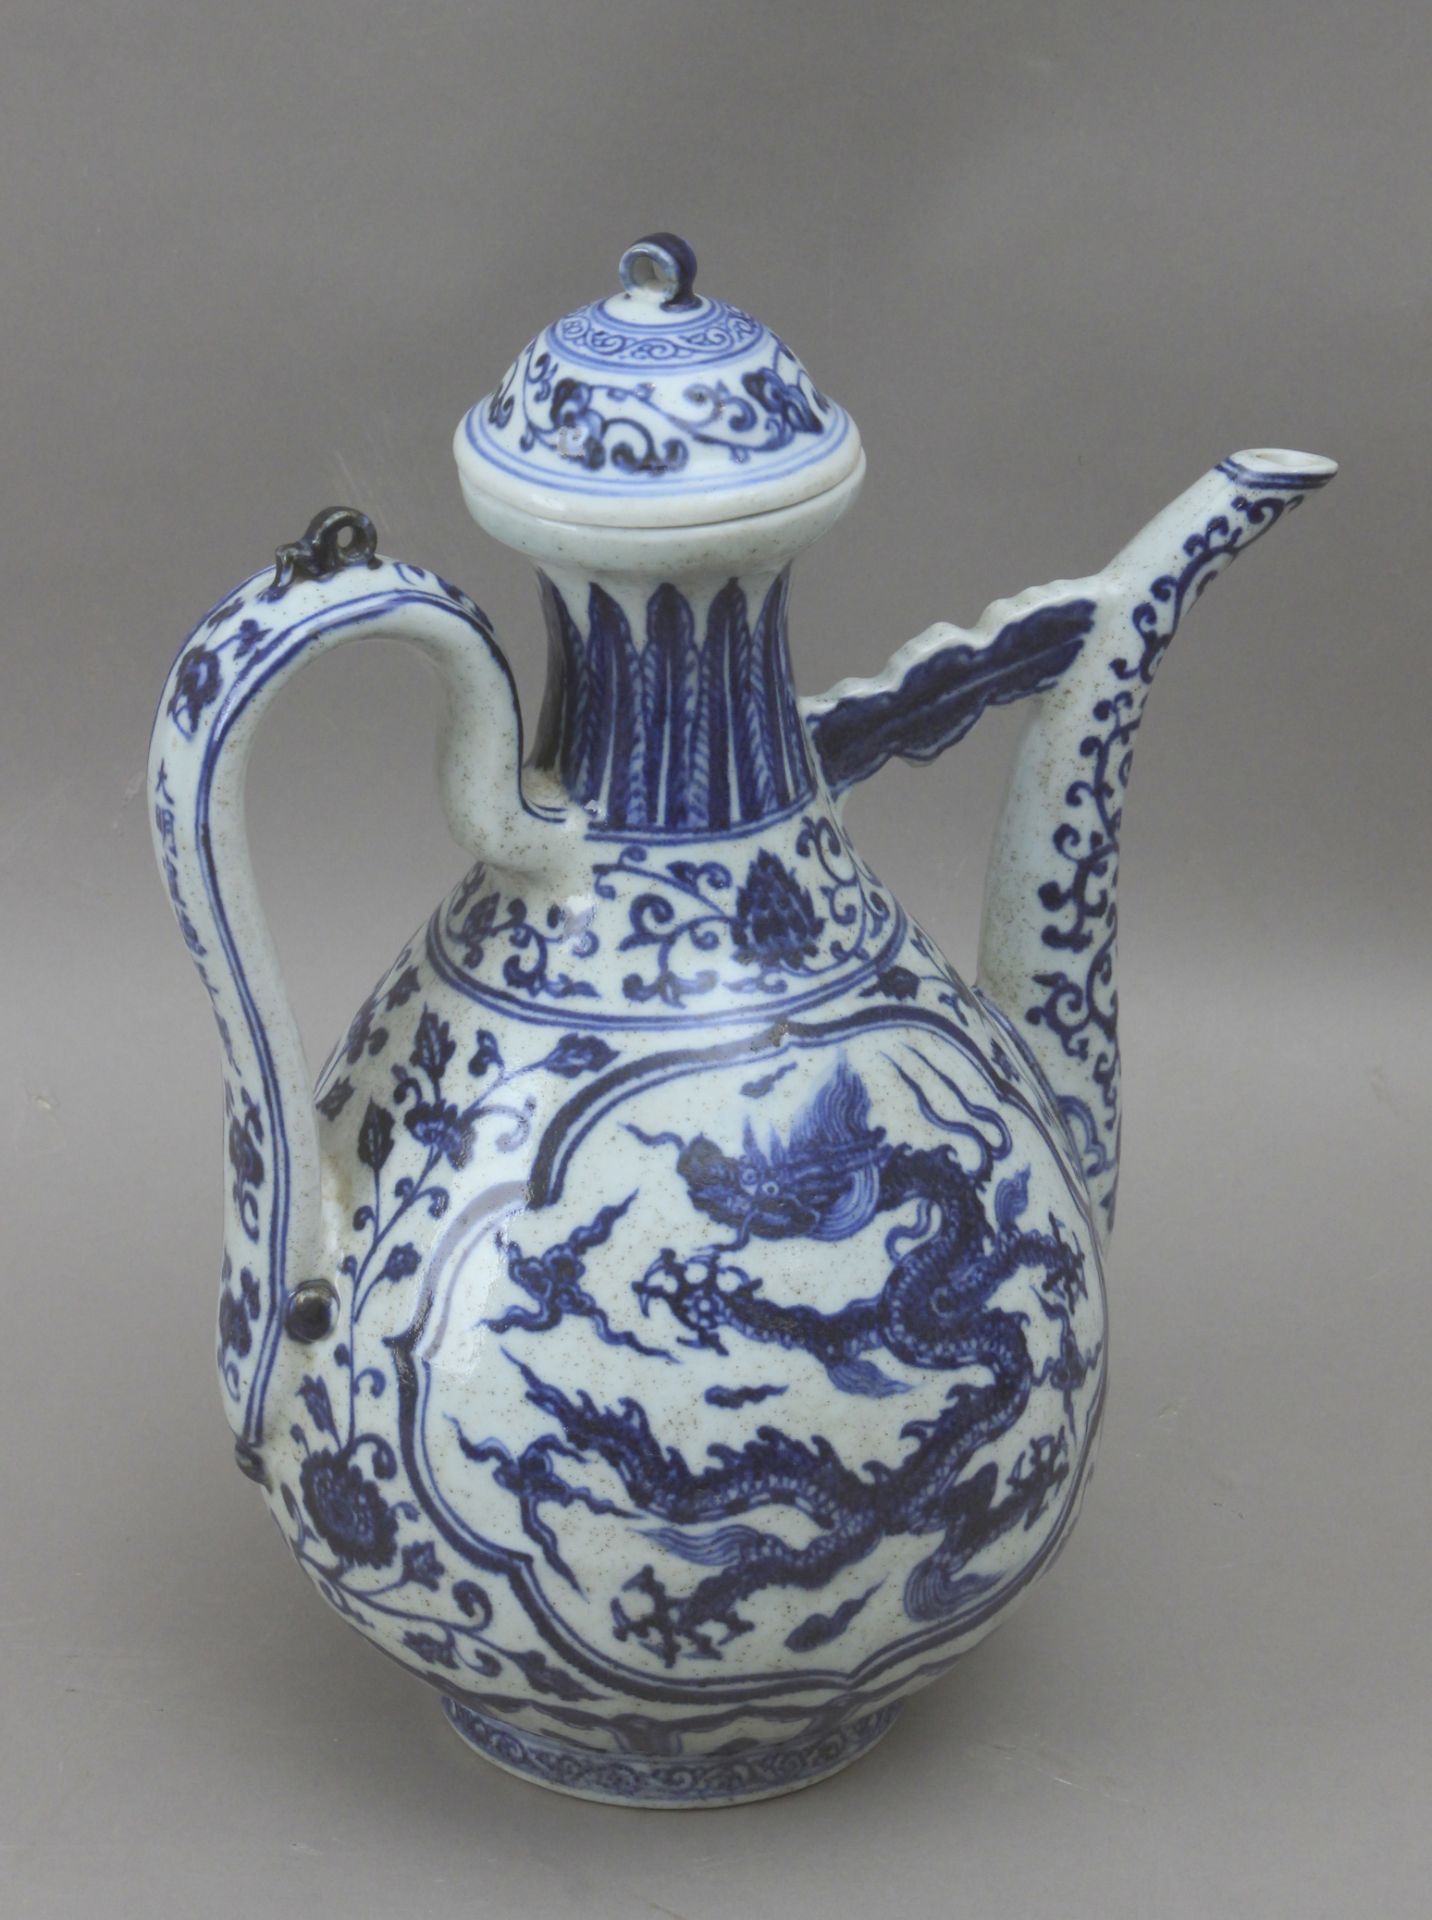 A 19th century Chinese wine pitcher from Qing dynasty - Image 2 of 4